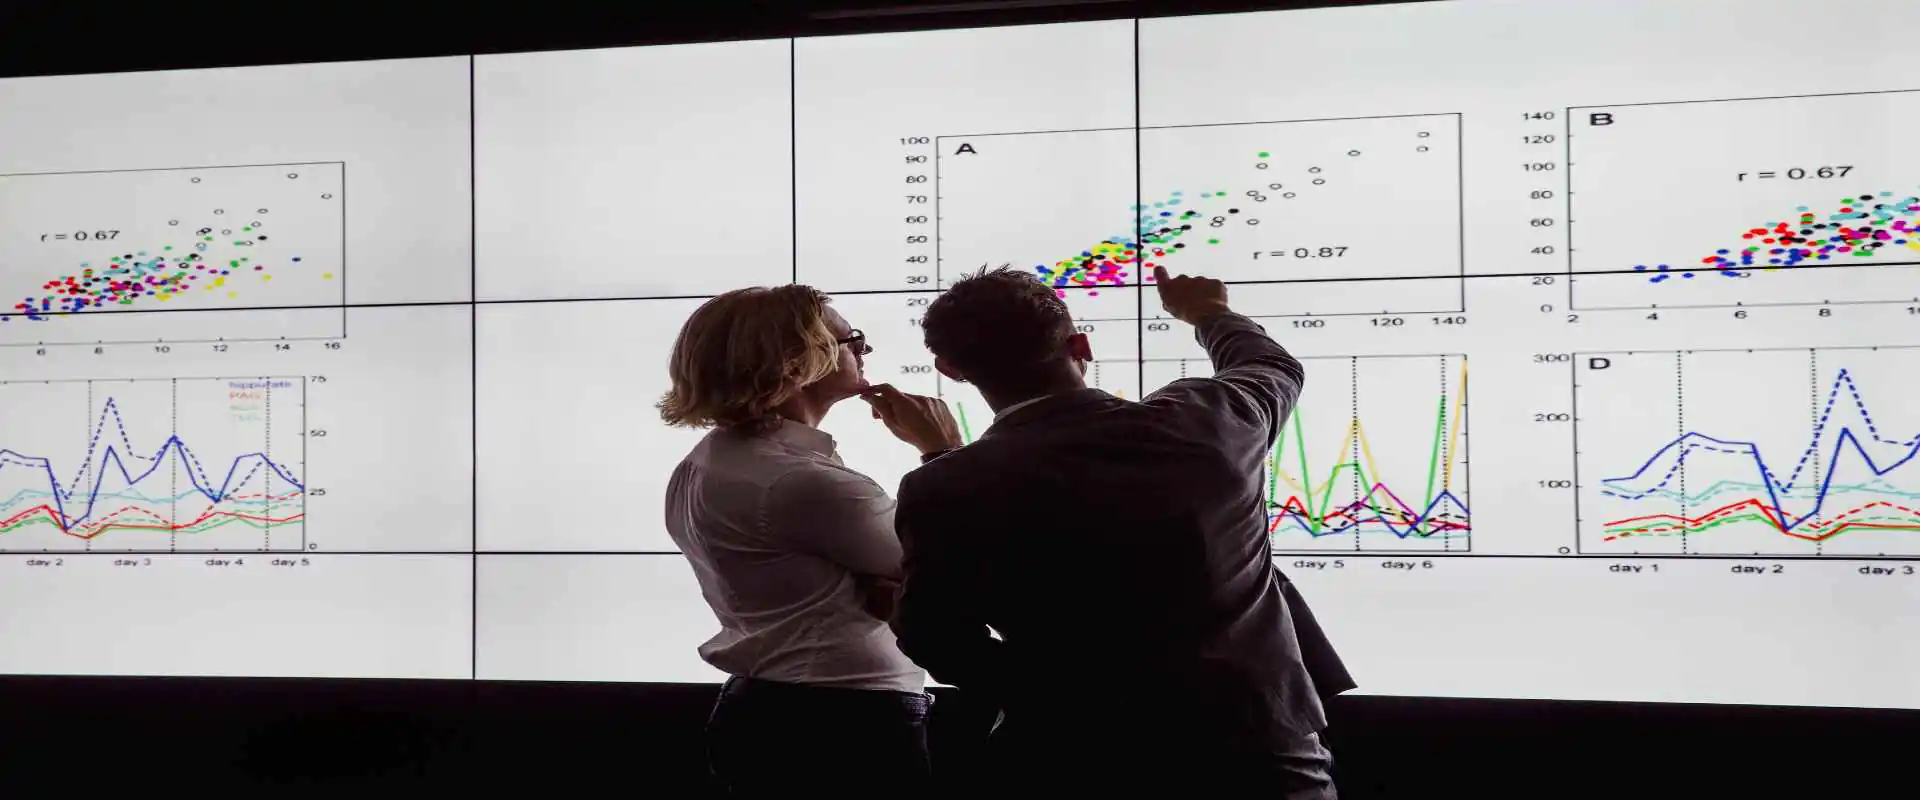 Visualization in Data Analytics: Evaluating and Importance of Data Analytics